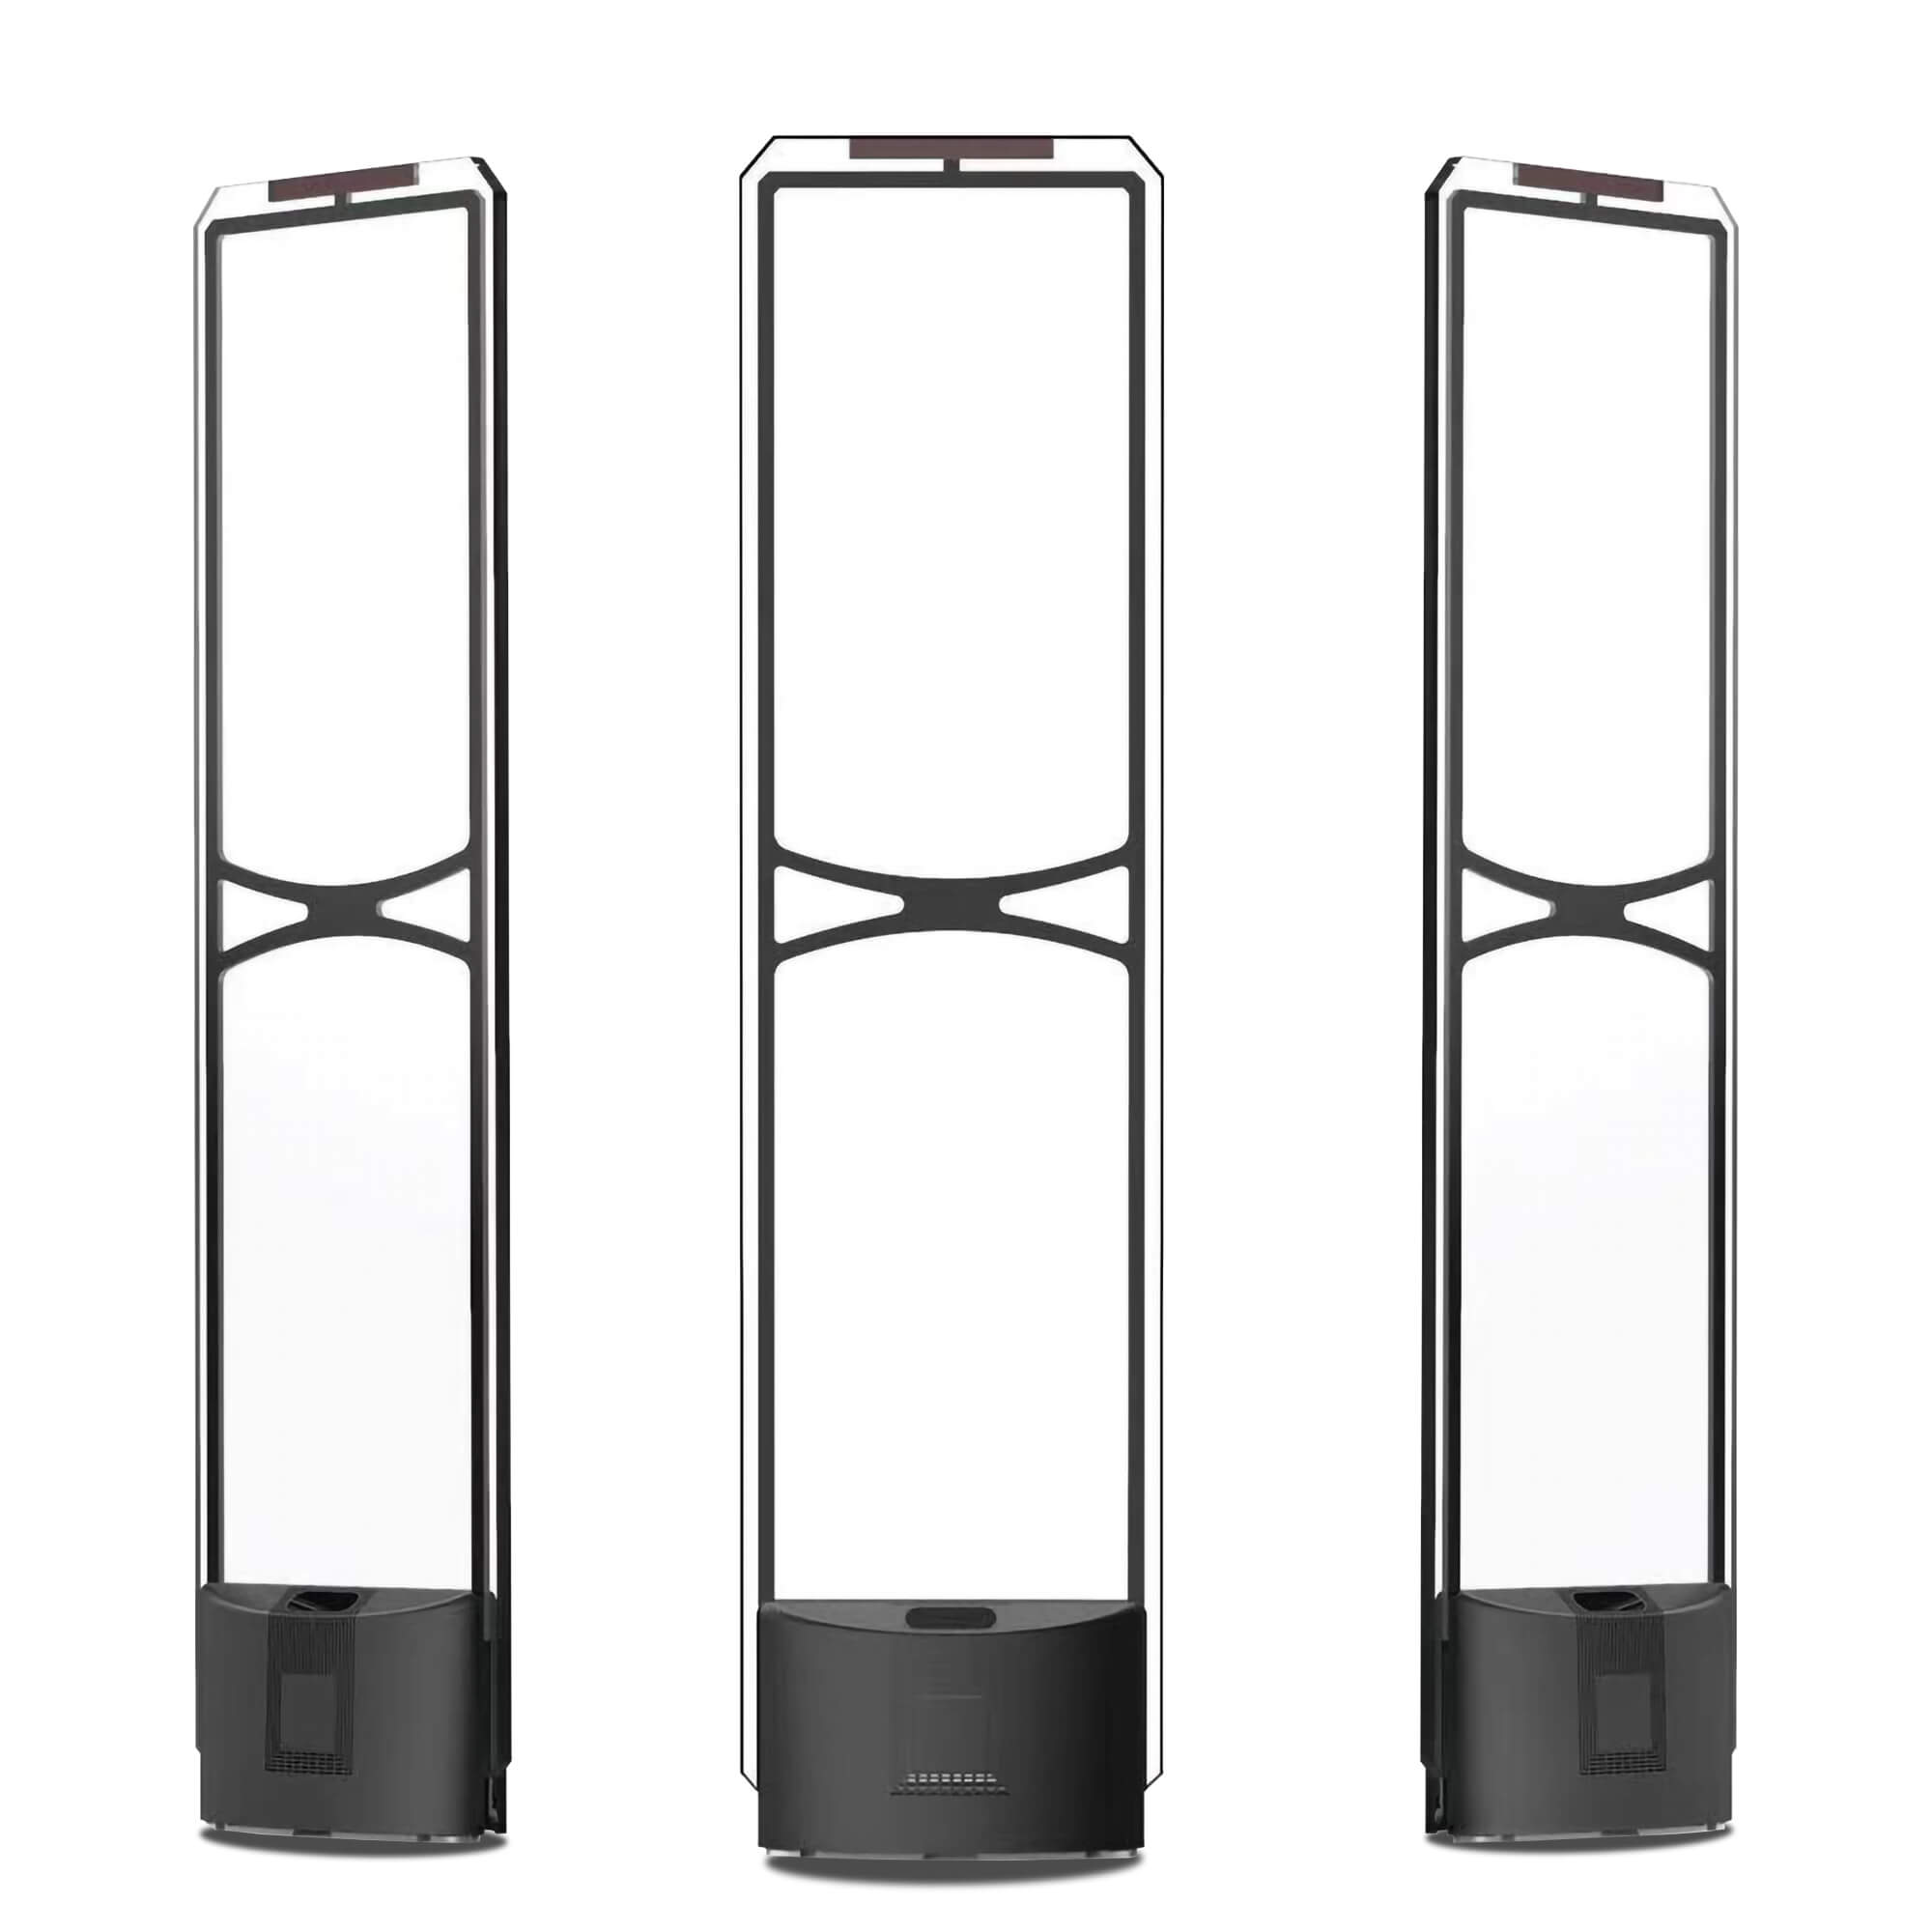 Tagsyn AM Retail Anti-Theft Equipment Acrylic Security Antenna System with Sound and Light Alarm, Jewelry, luxury Goods Market Theft-Prevention EAS System, 58KHz